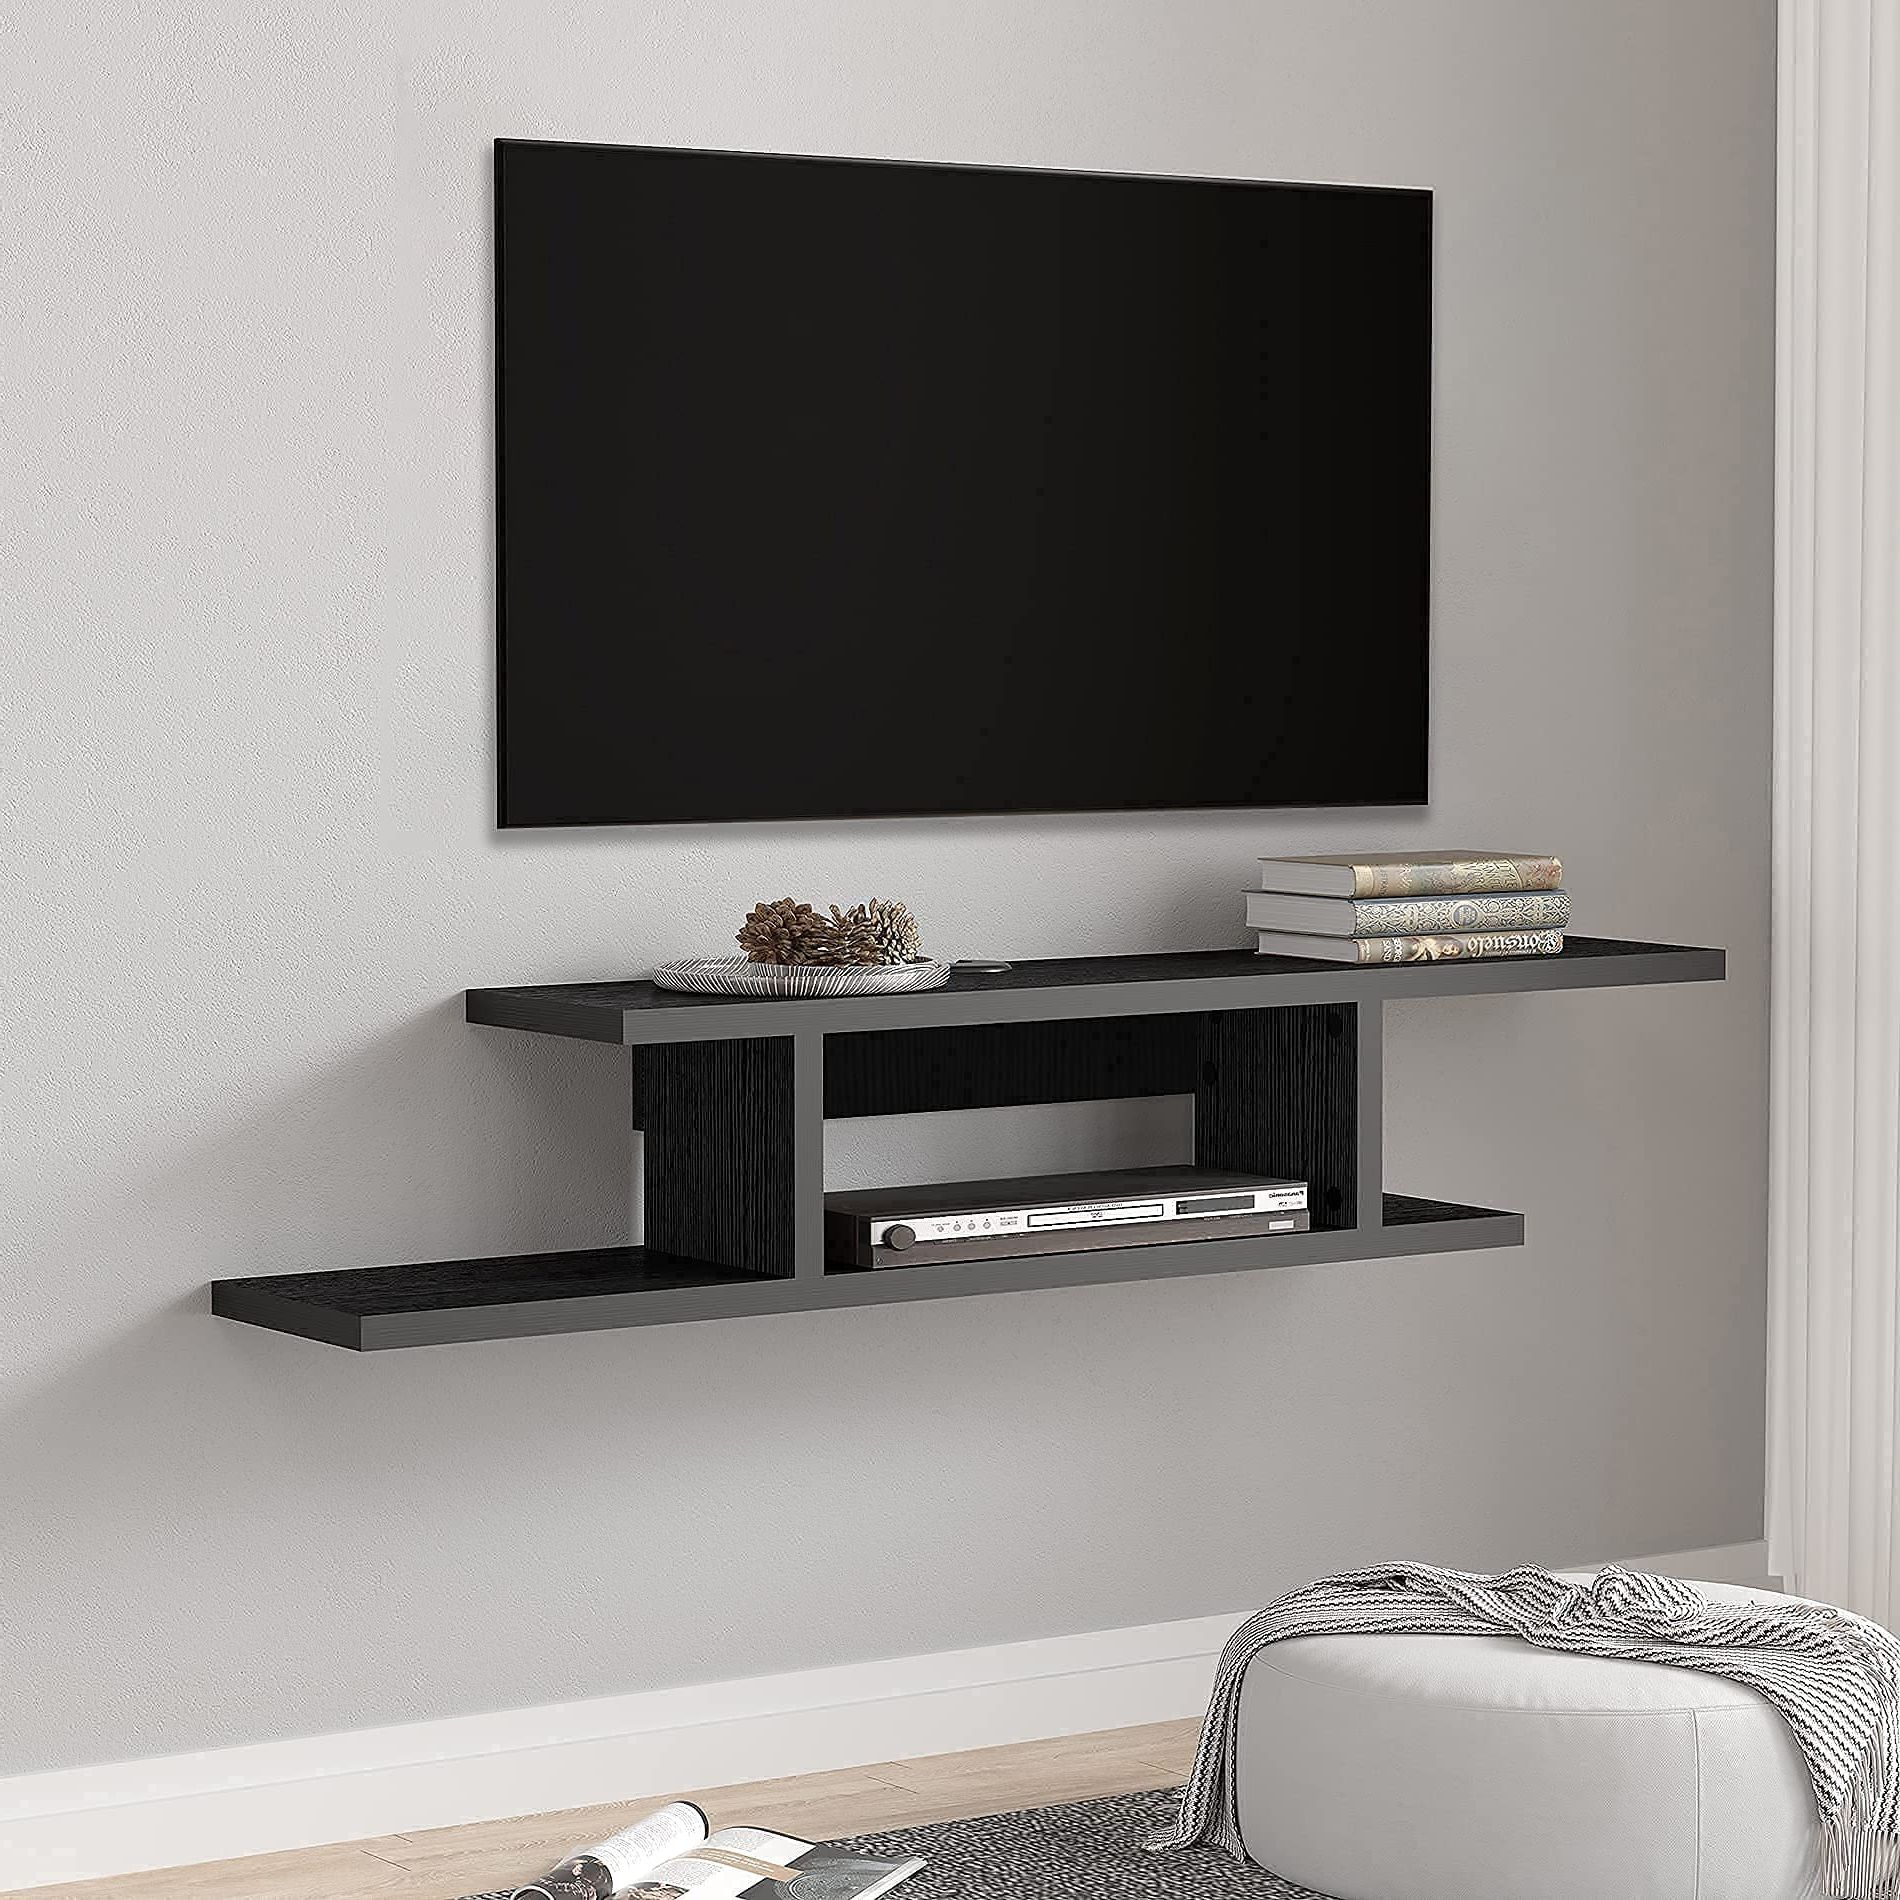 Tv Stands With Shelf Throughout Widely Used Amazon: Fitueyes Concise Floating Tv Stand Shelf – Wall Mounted Entertainment  Center Media Console Component Wall Cabinet, Black, 50" : Home & Kitchen (View 9 of 10)